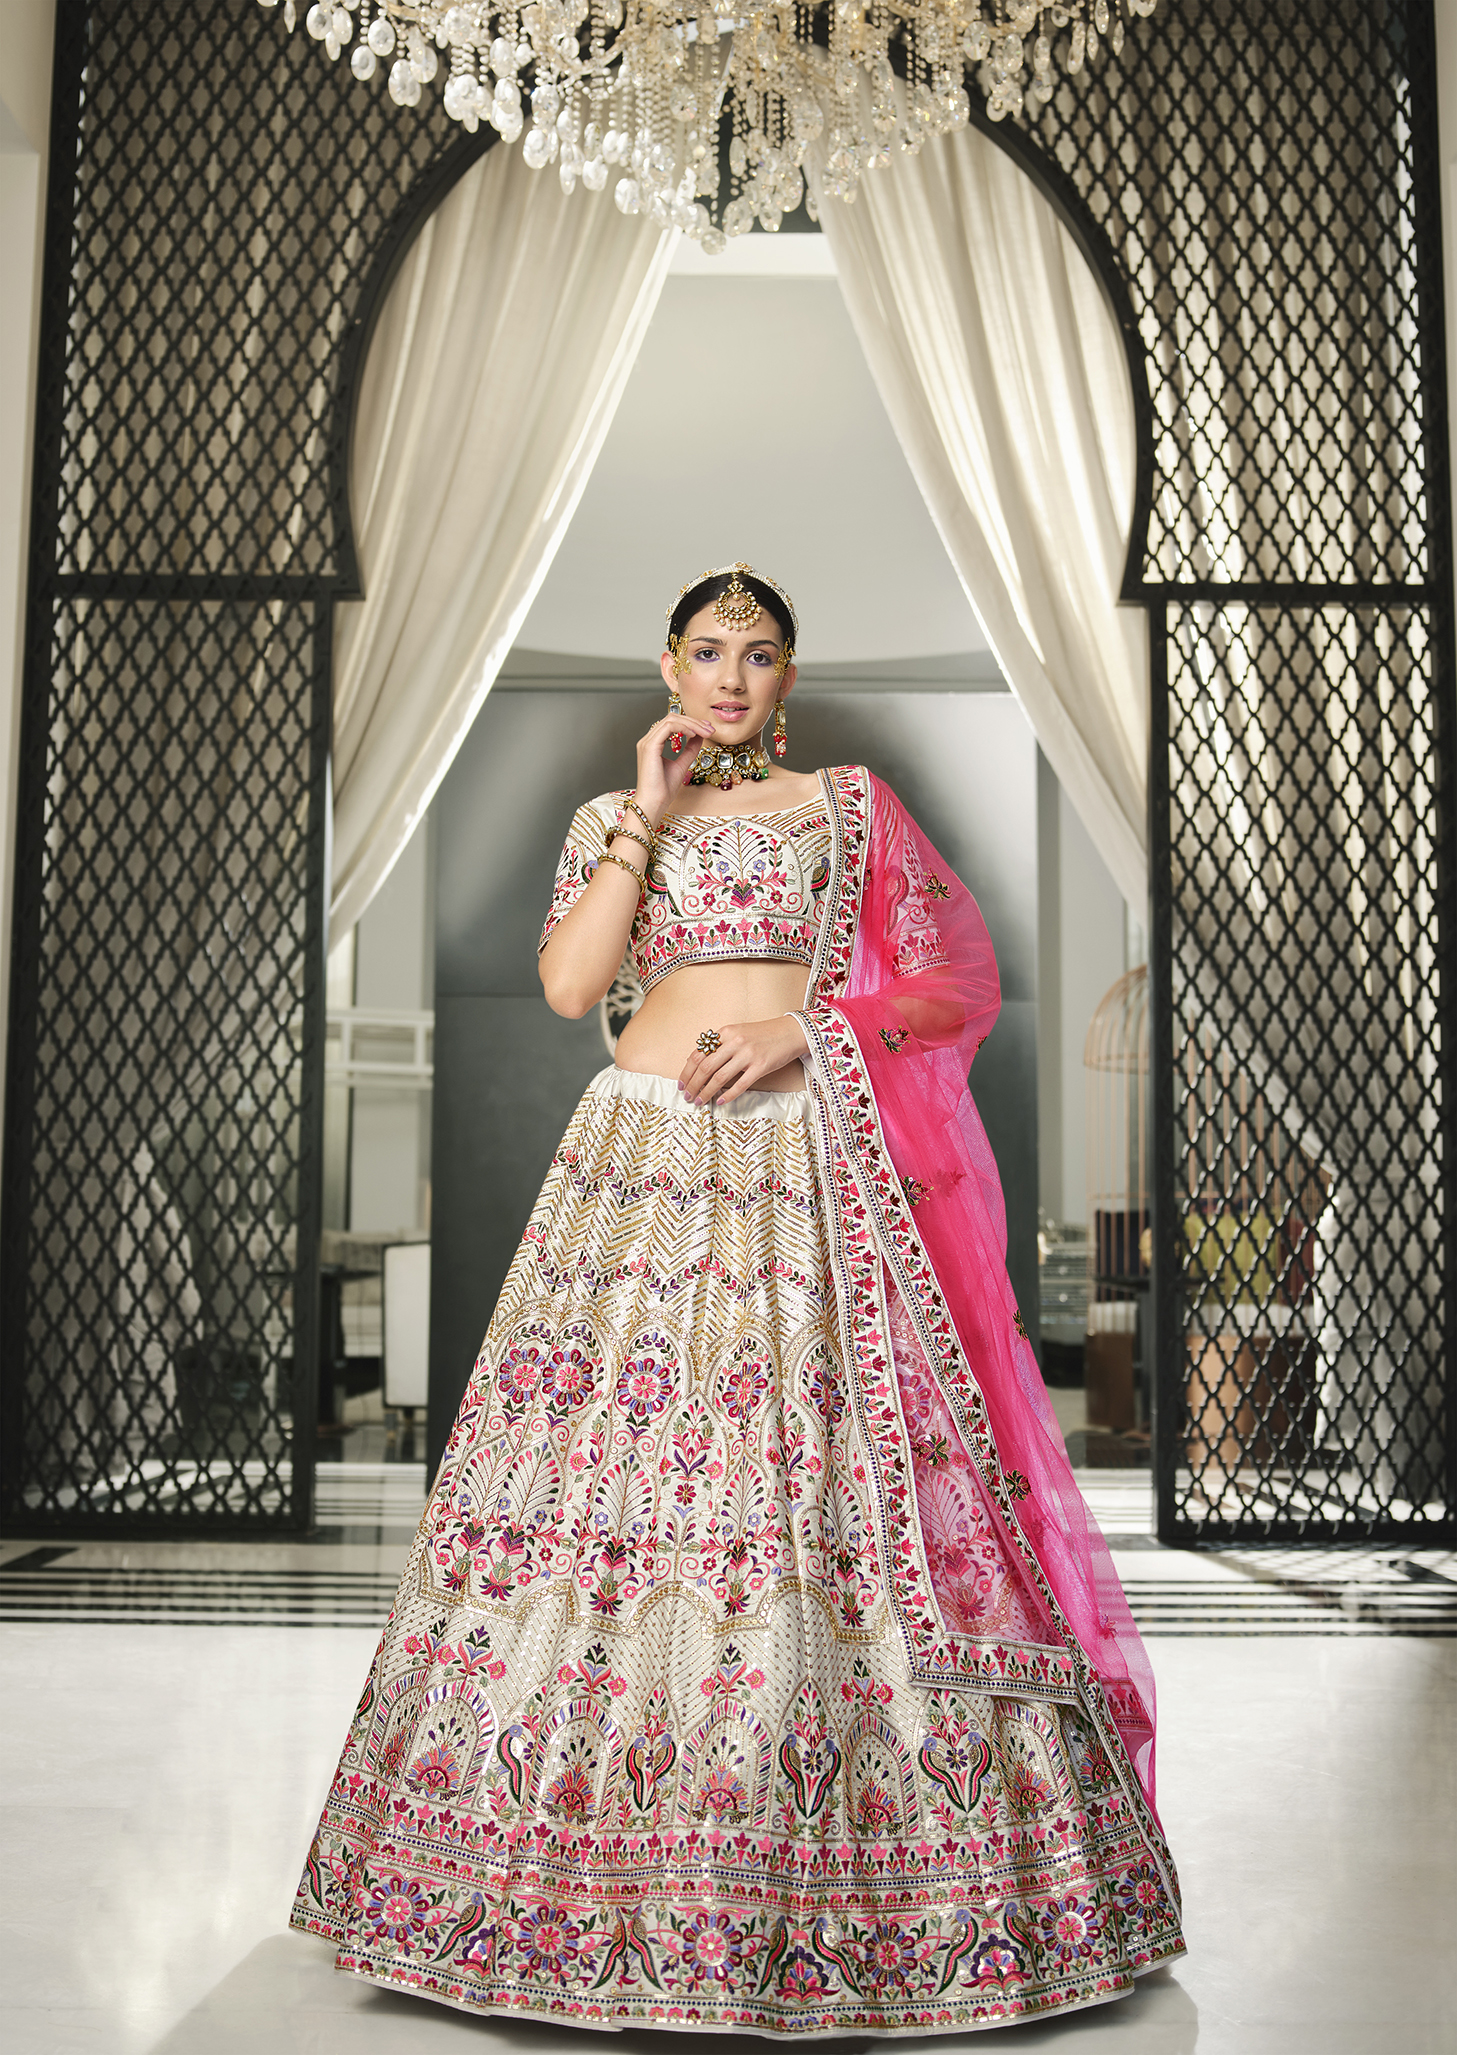 Blossom in Style with Floral Lehenga Choli | Zeel Clothing | Work Details:  Pearl Work